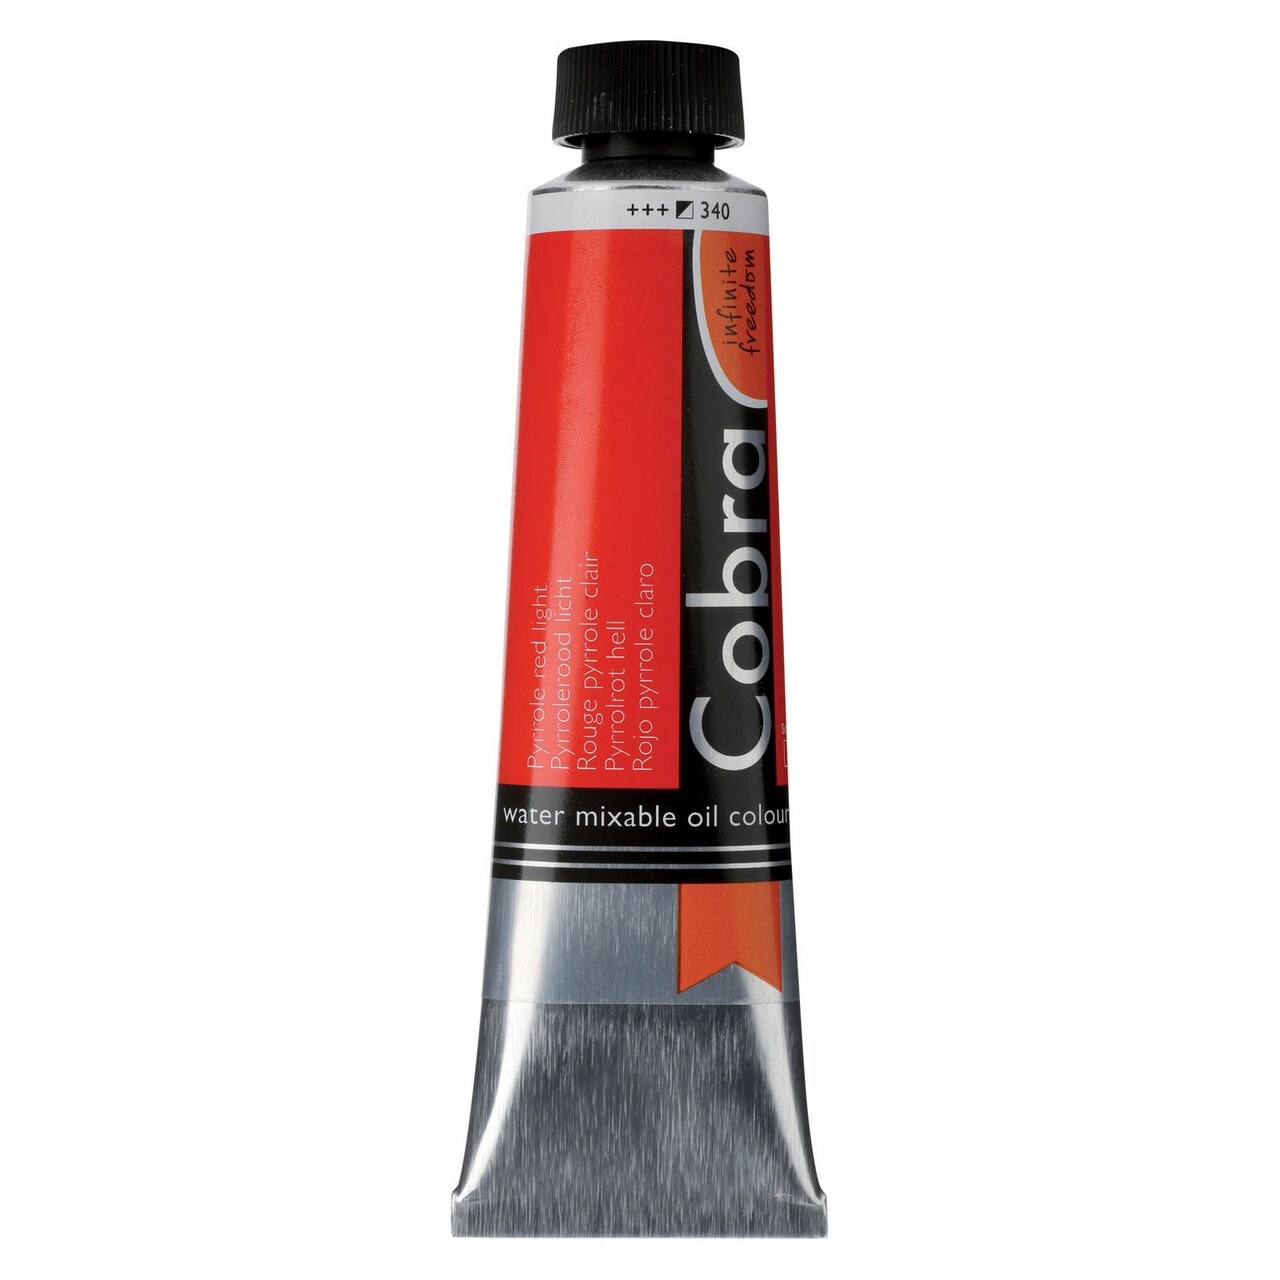 Cobra Water Mixable Oil Colour 40ml, Pyrrole Red Light